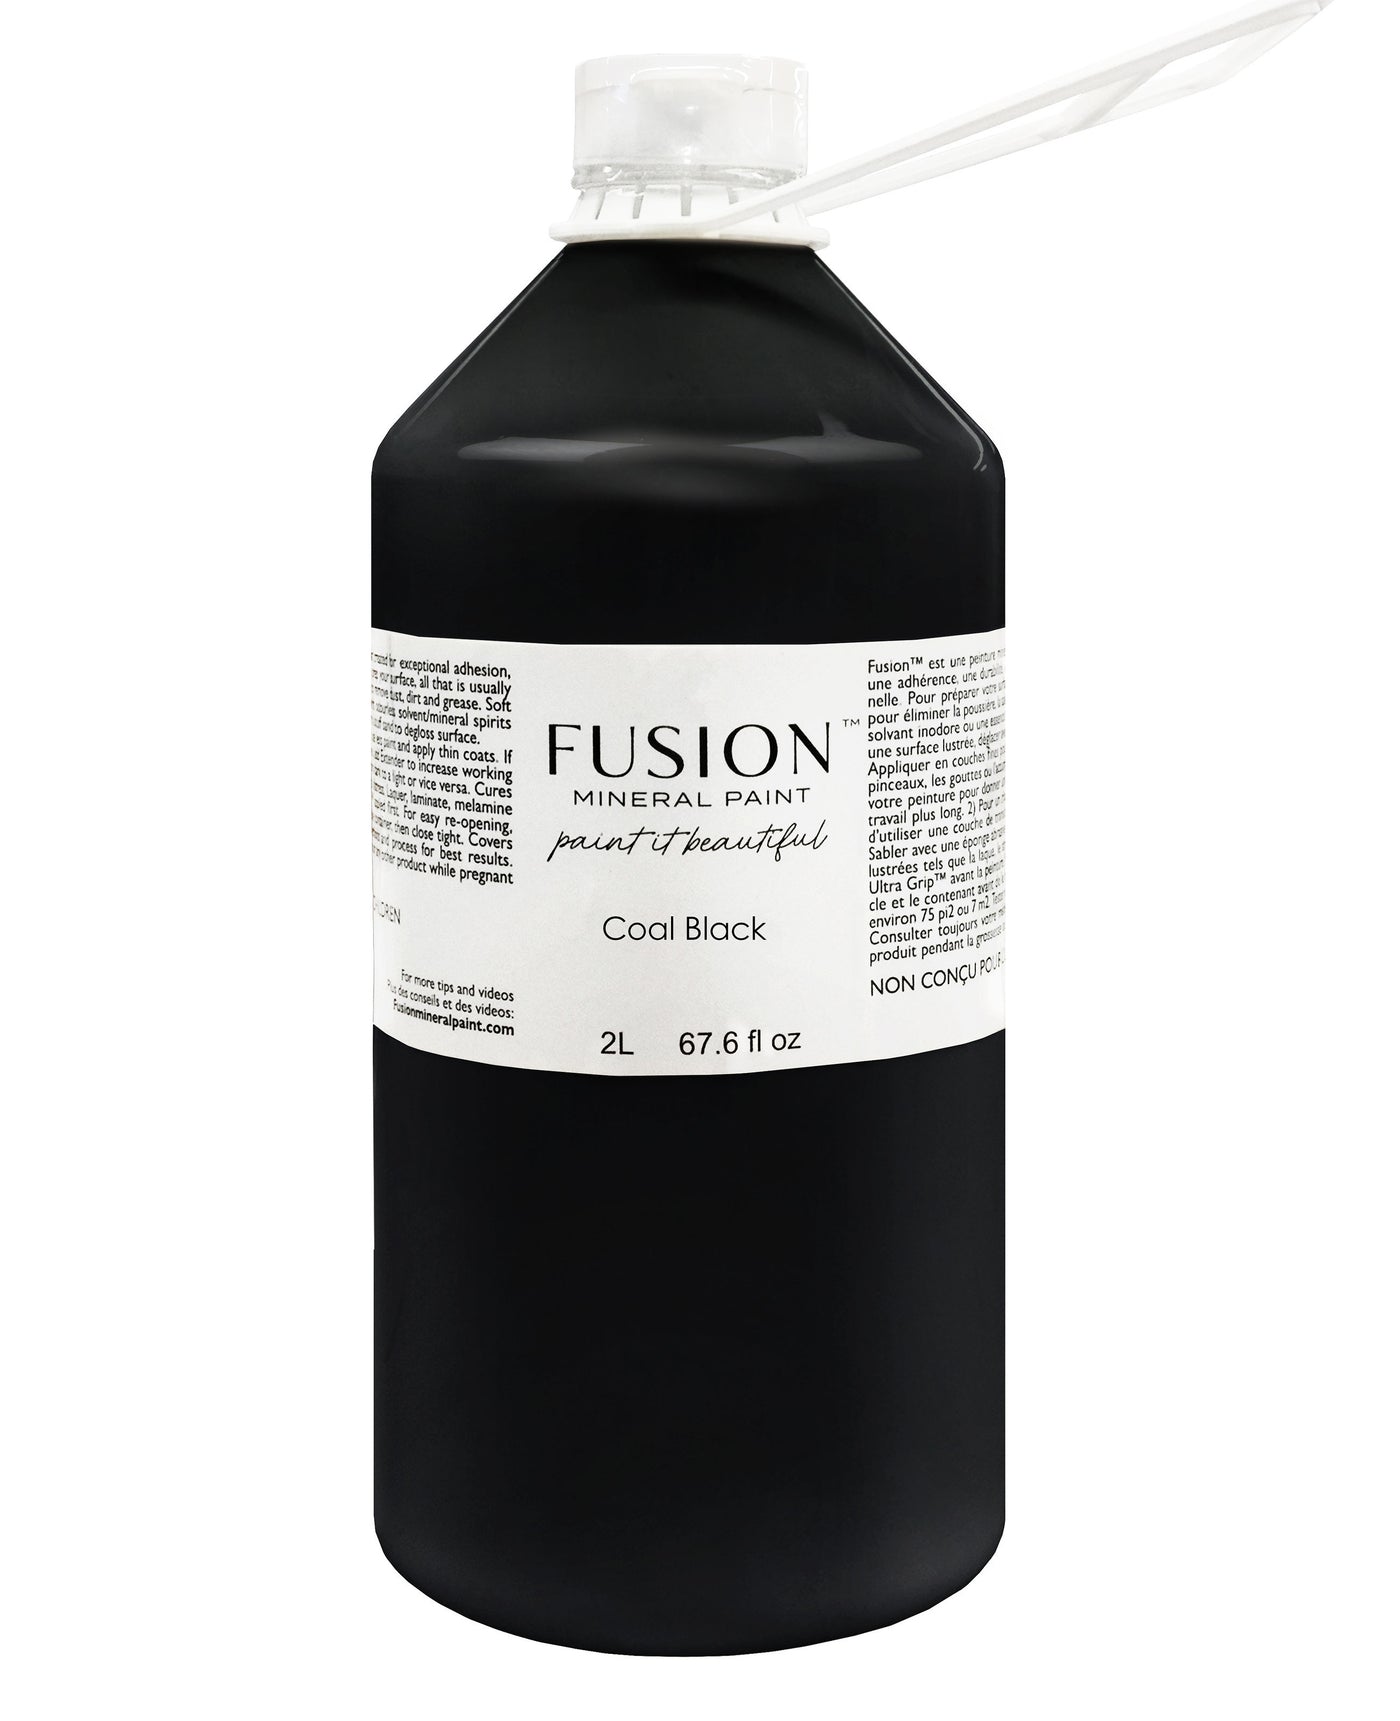 Coal black 2L container from Fusion Mineral Paint